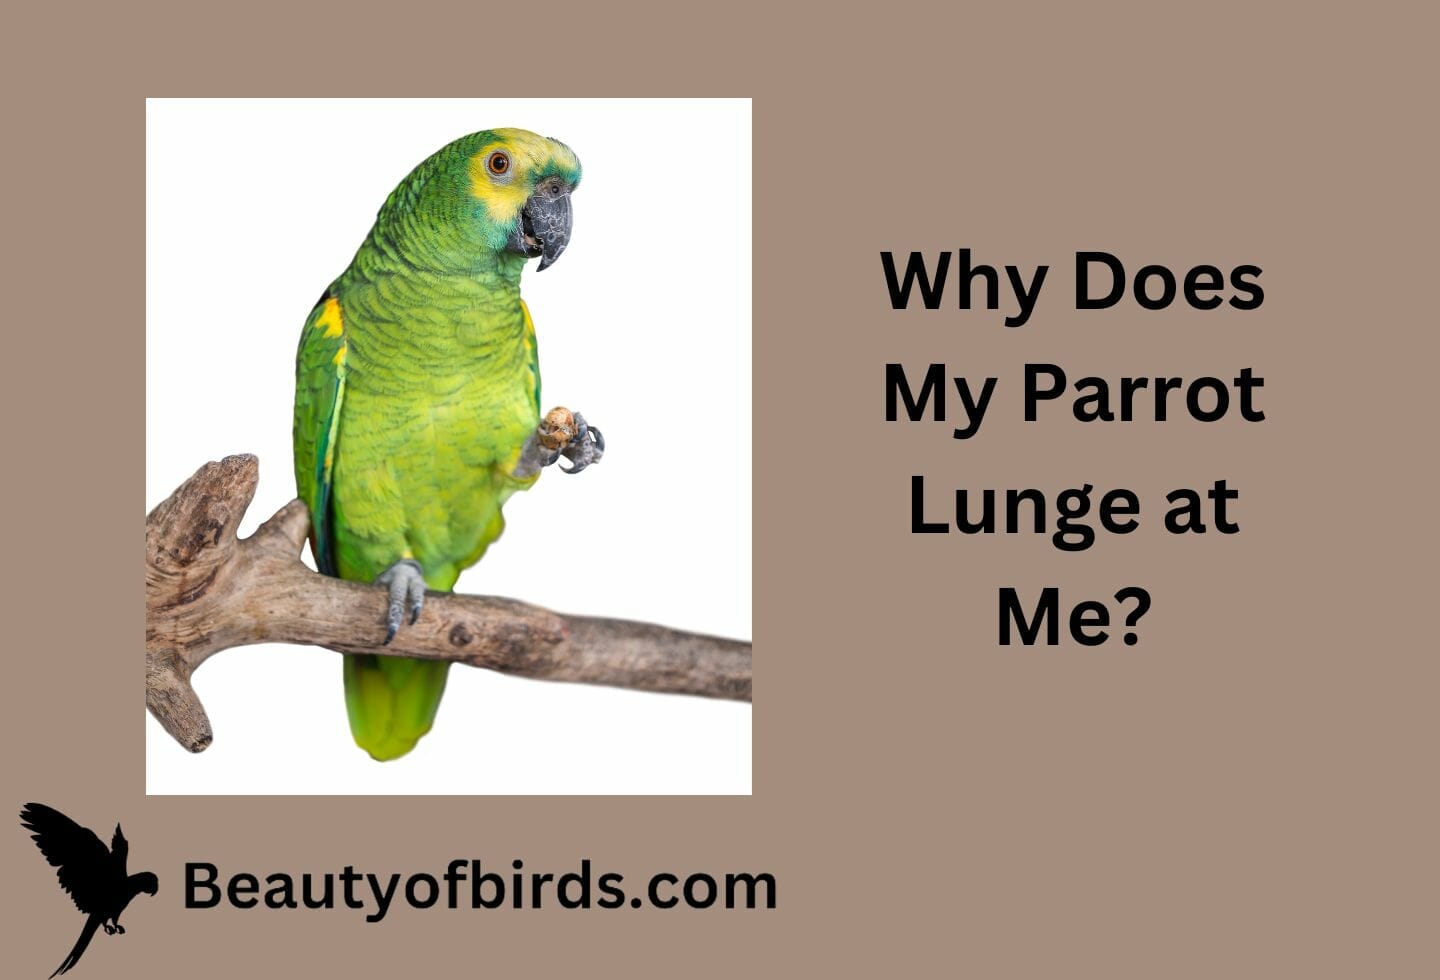 Why Does My Parrot Lunge at Me